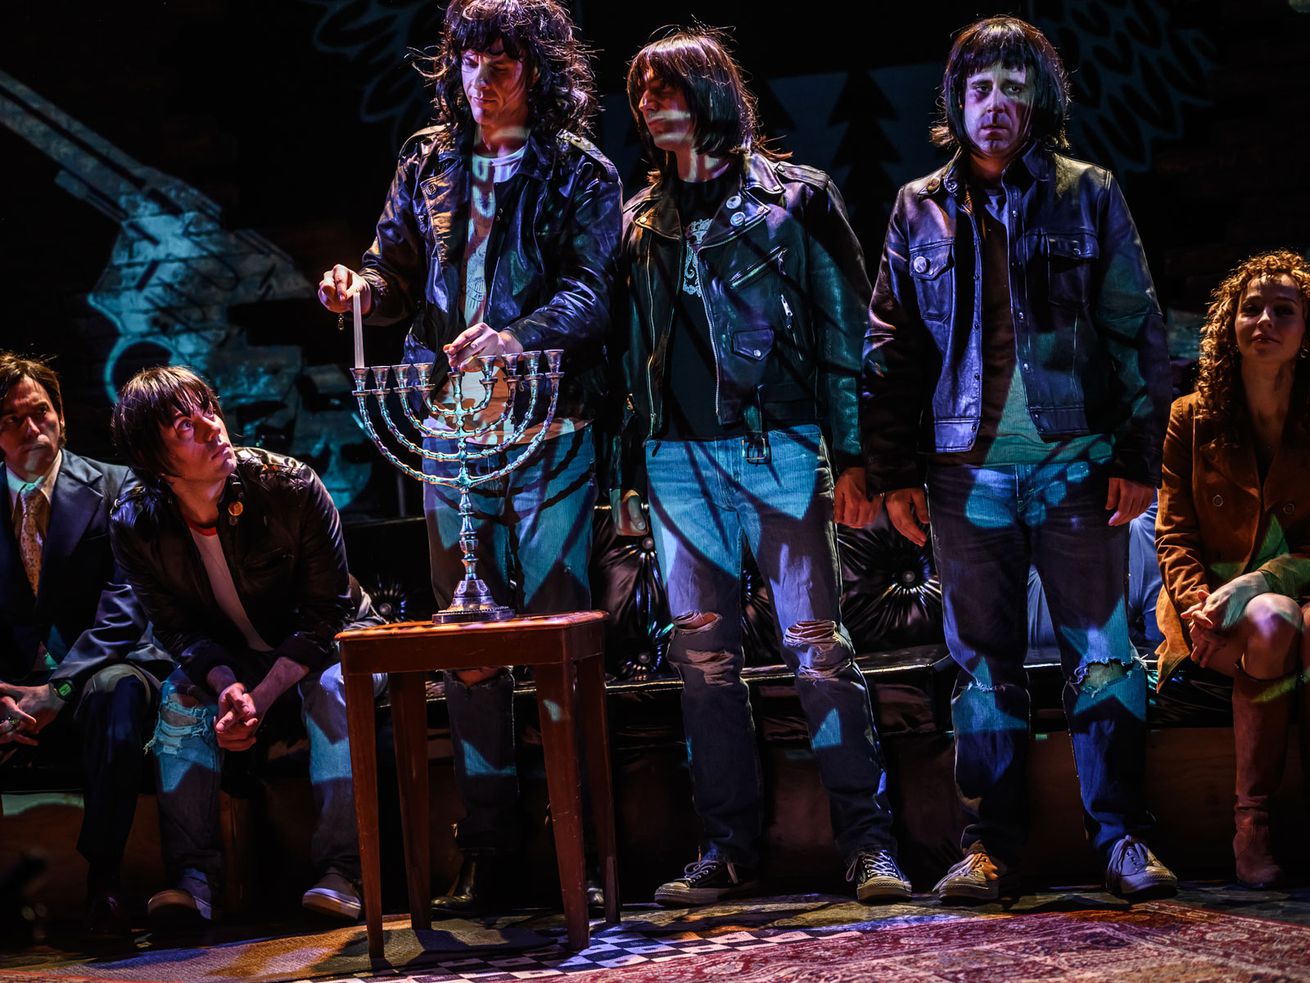 Ron Pederson (as Phil, from left), Paolo Santalucia (as Dee Dee), Justin Goodhand (as Joey), Cyrus Lane (as Johnny), James Smith (as Marky) and Vanessa Smythe (as Linda) in “Four Chords and a Gun.” 